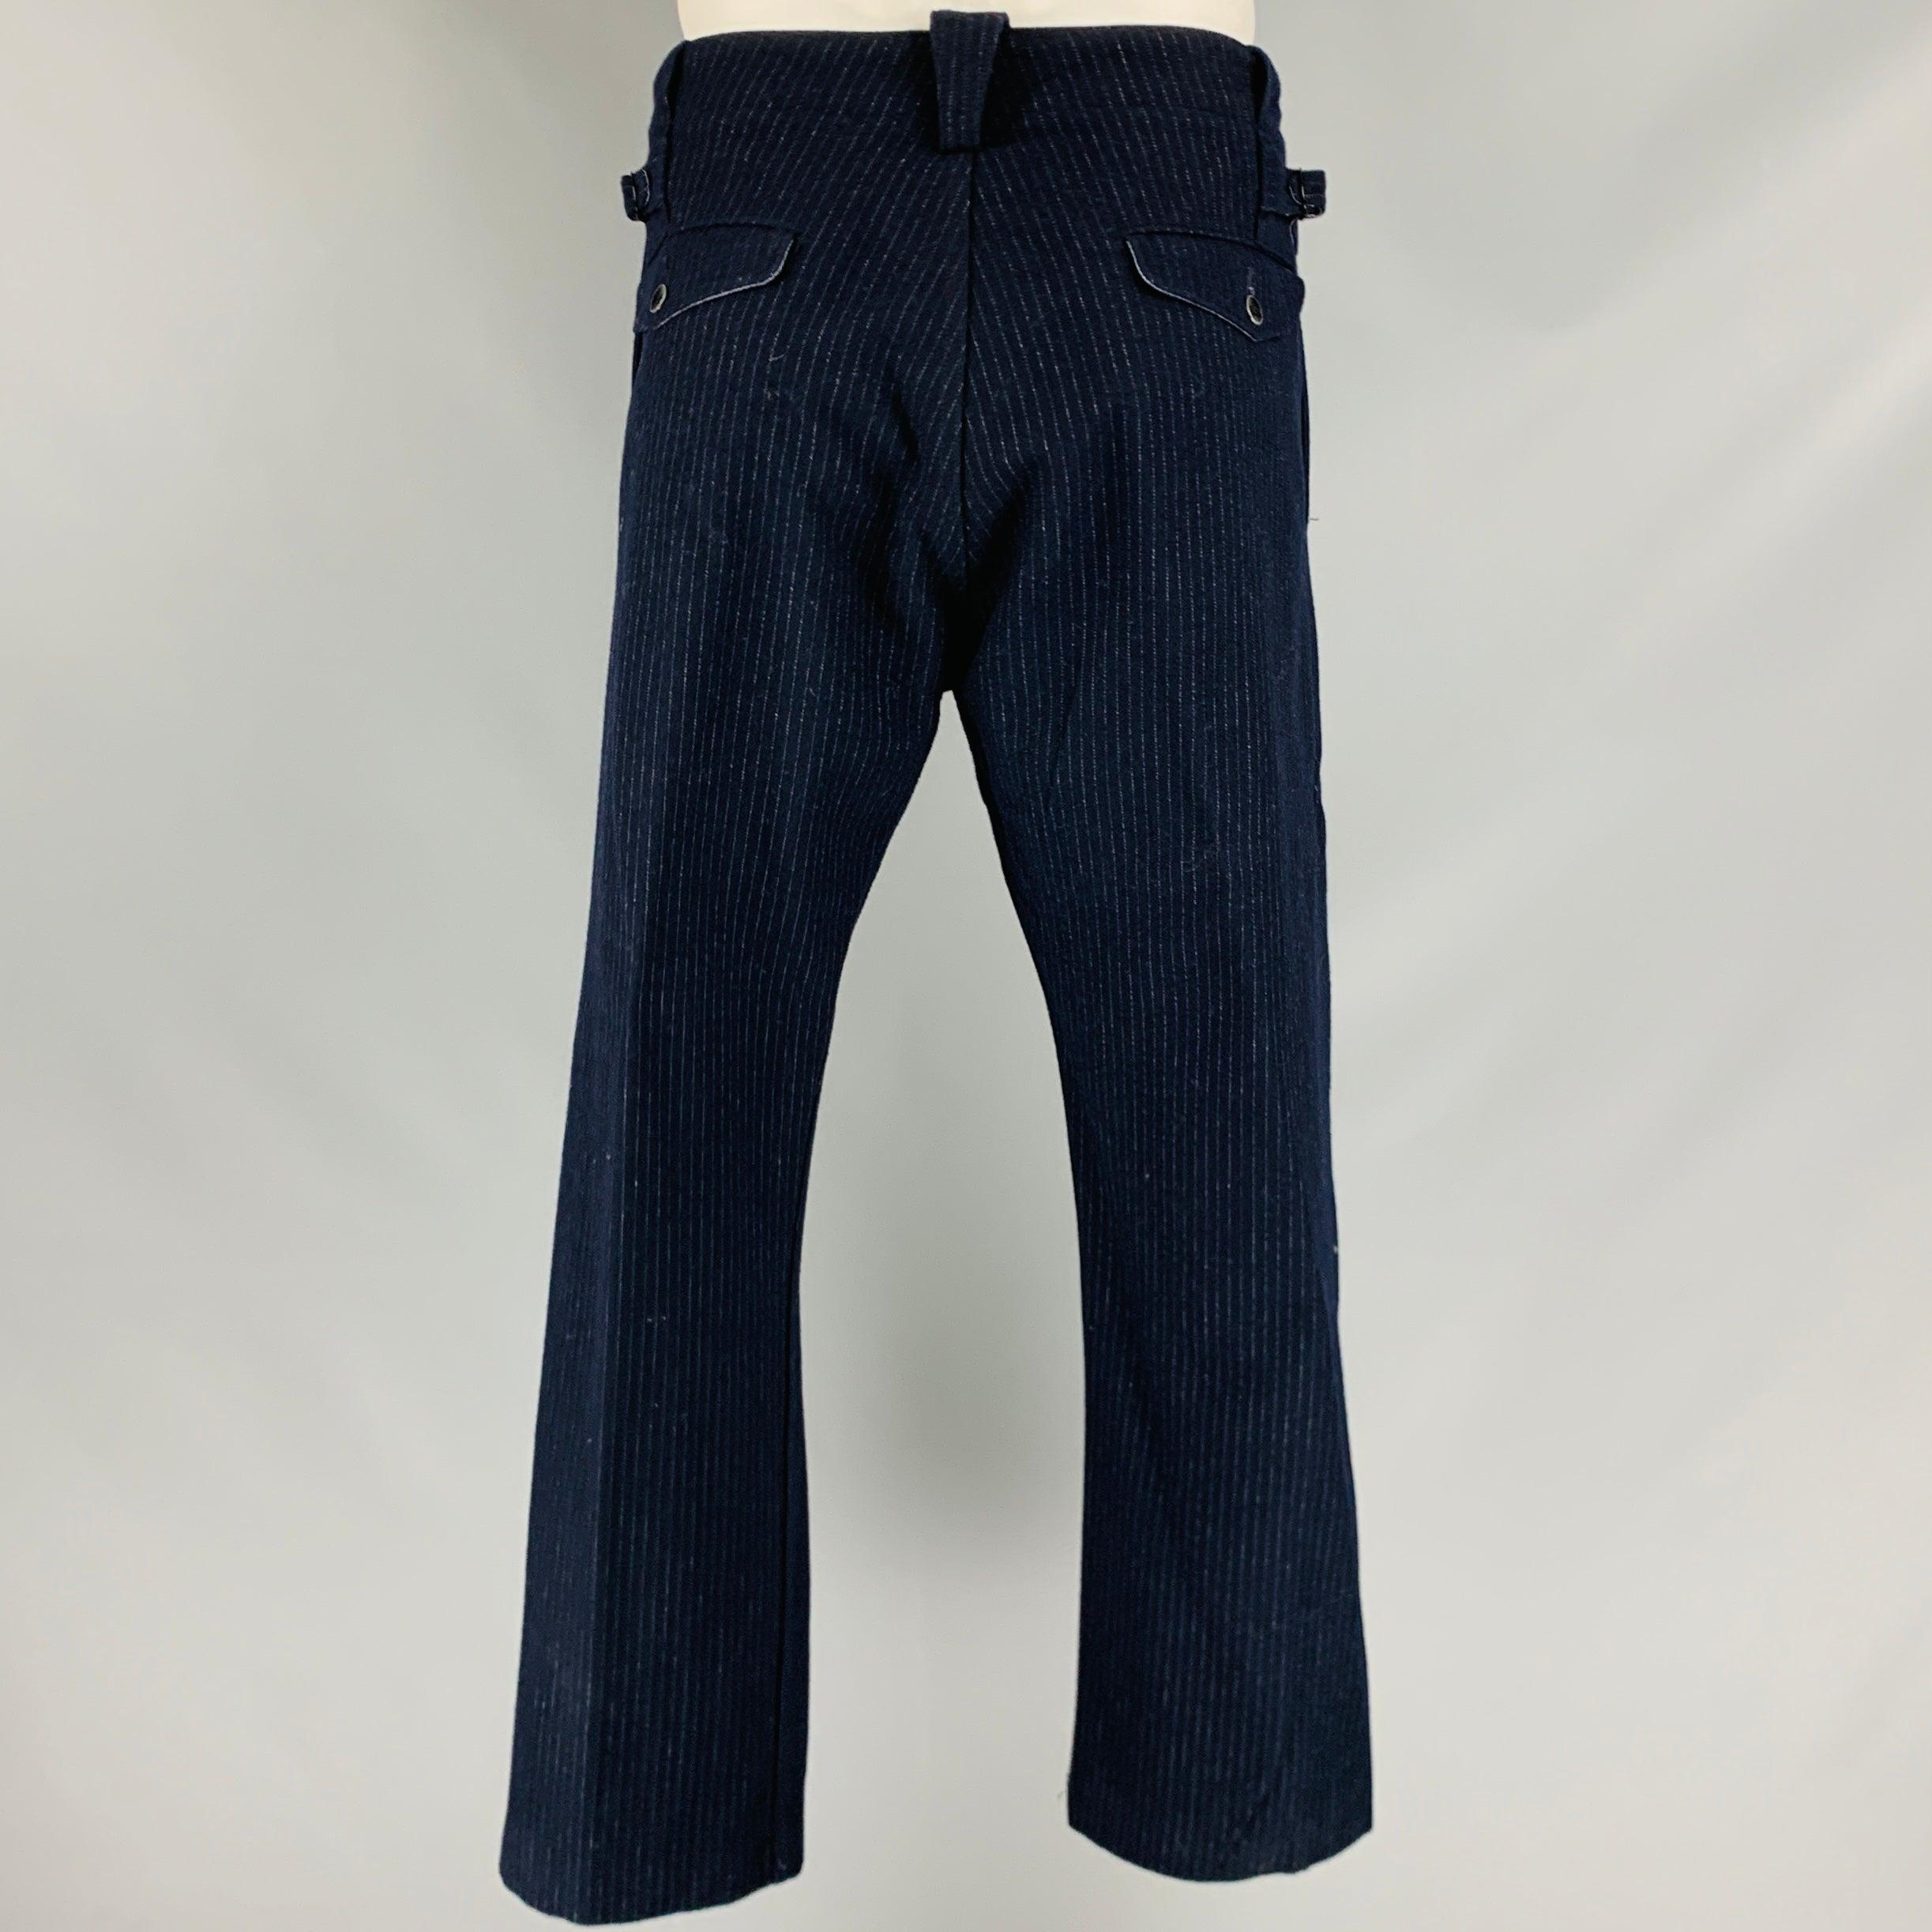 RRL by RALPH LAUREN Size 36 Navy Stripe Wool Blend Button Fly Dress Pants In Excellent Condition For Sale In San Francisco, CA